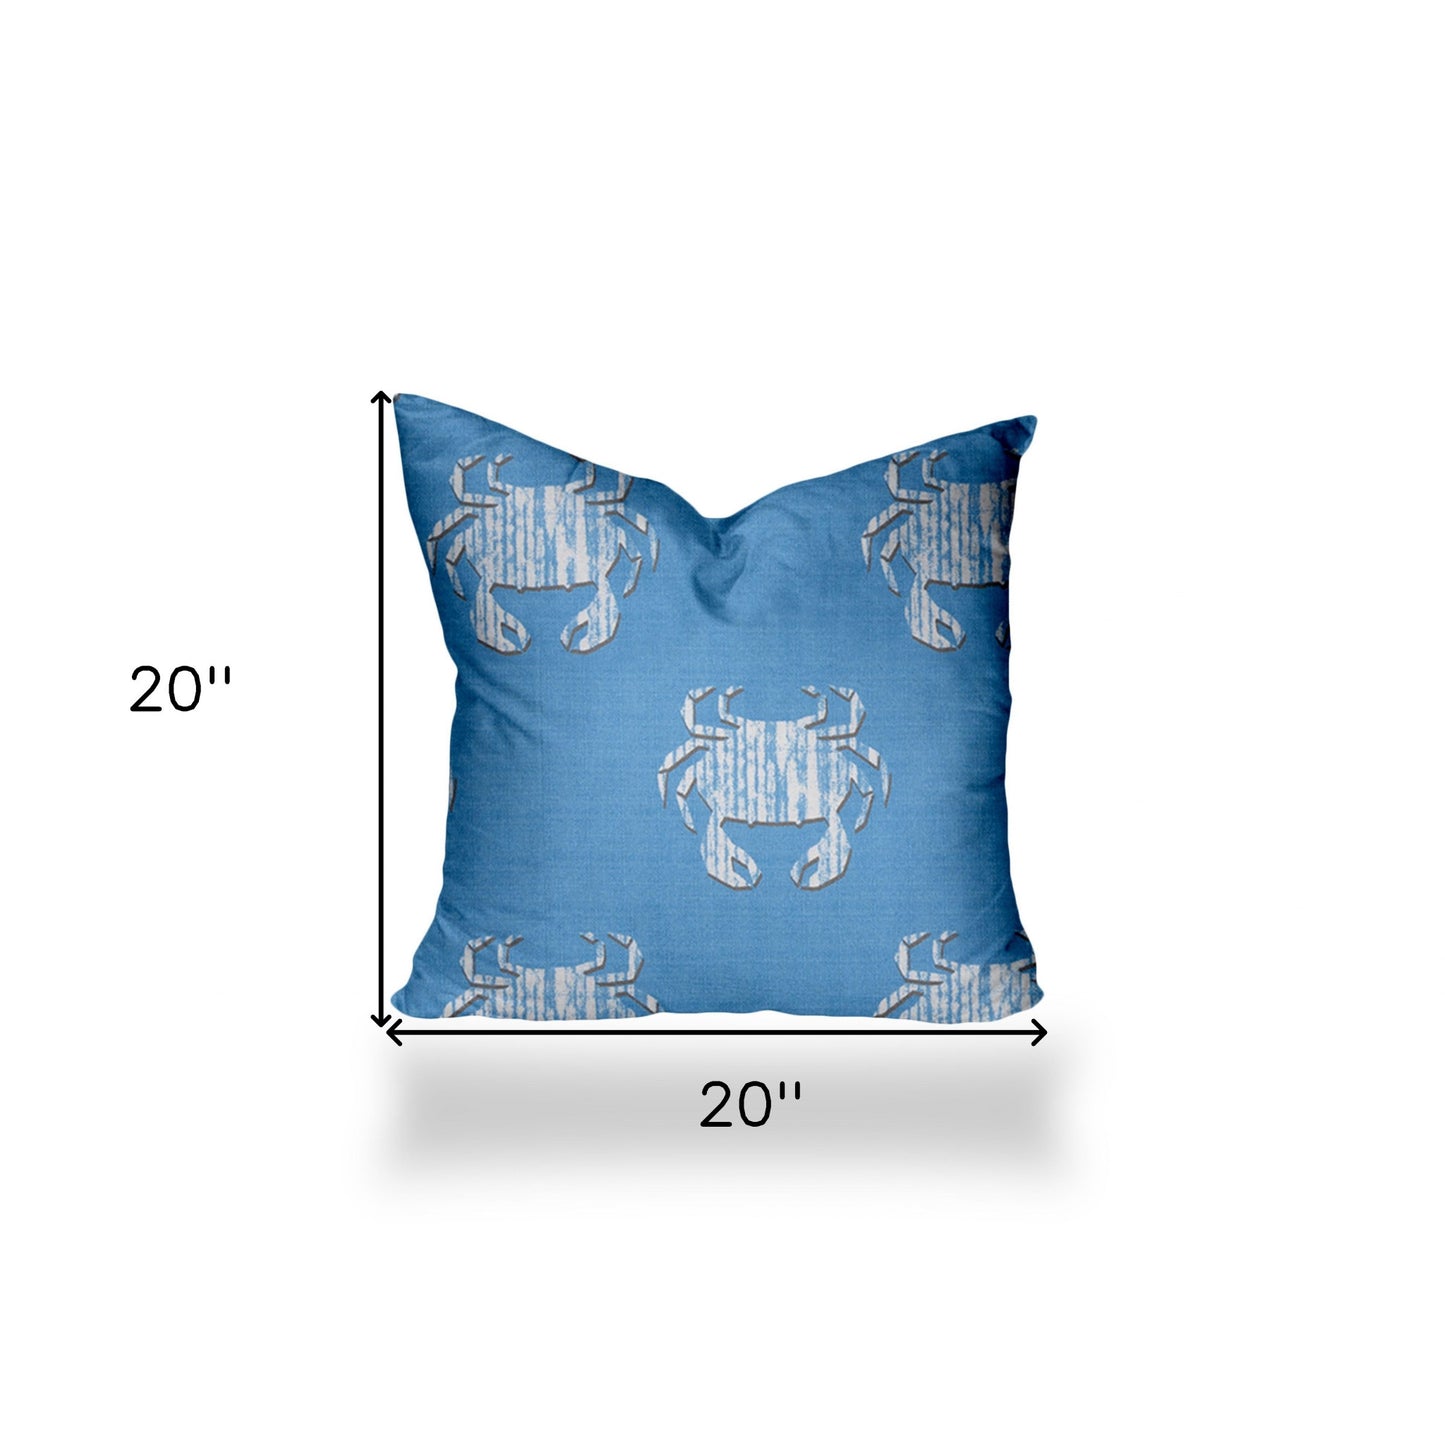 20" X 20" Blue And White Crab Enveloped Coastal Throw Indoor Outdoor Pillow